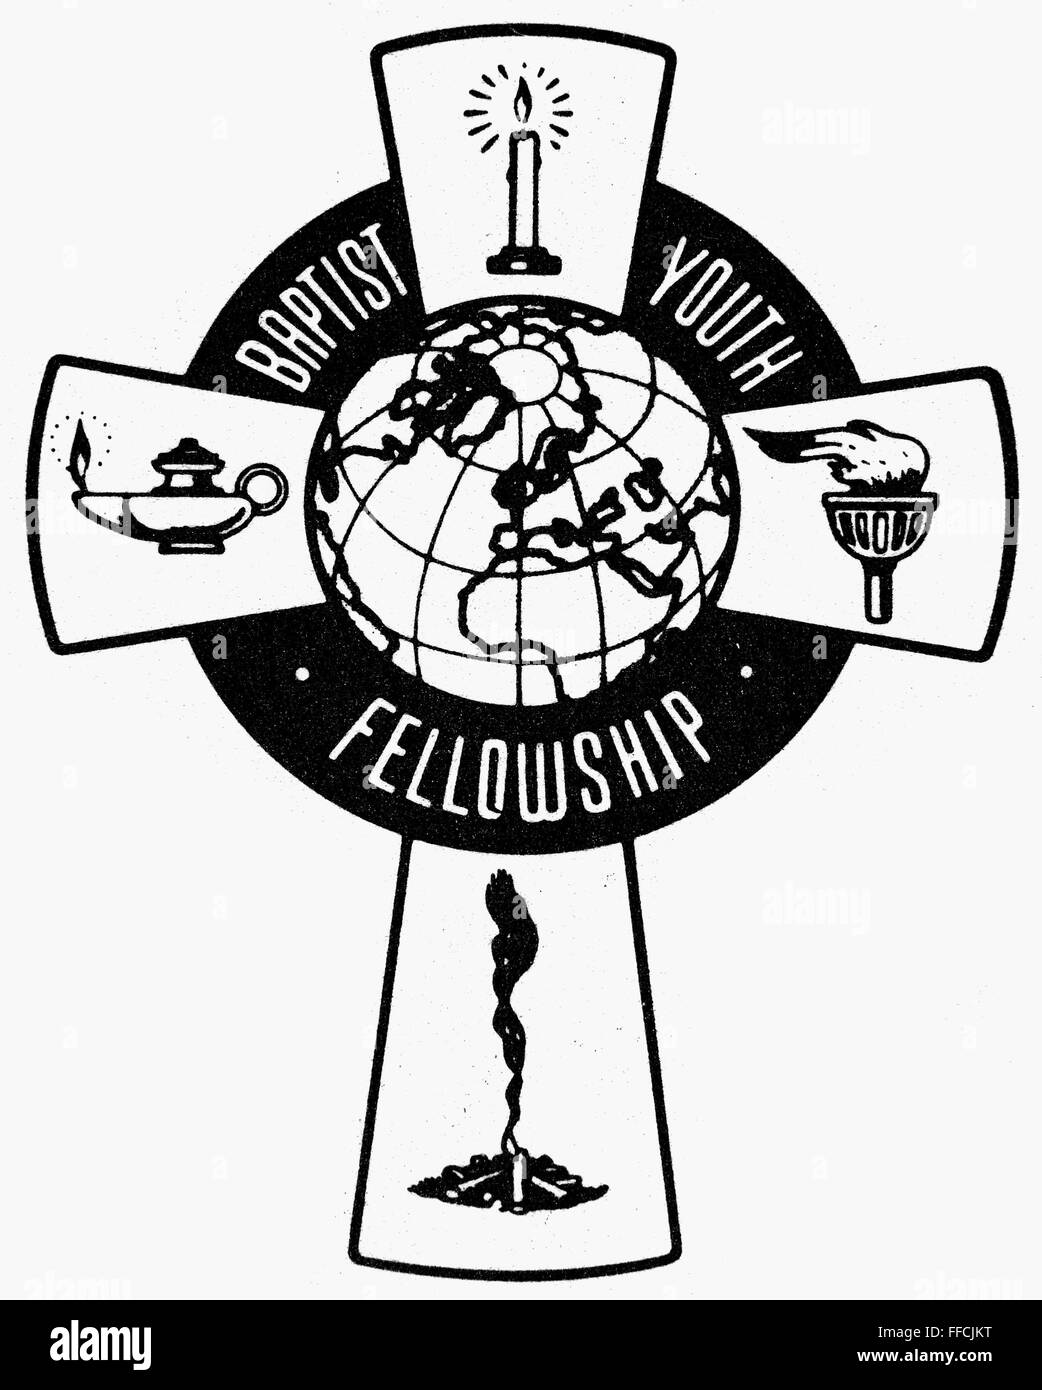 BAPTIST YOUTH FELLOWSHIP. /nSymbol of the Baptist Youth Fellowship, founded 1941. Stock Photo